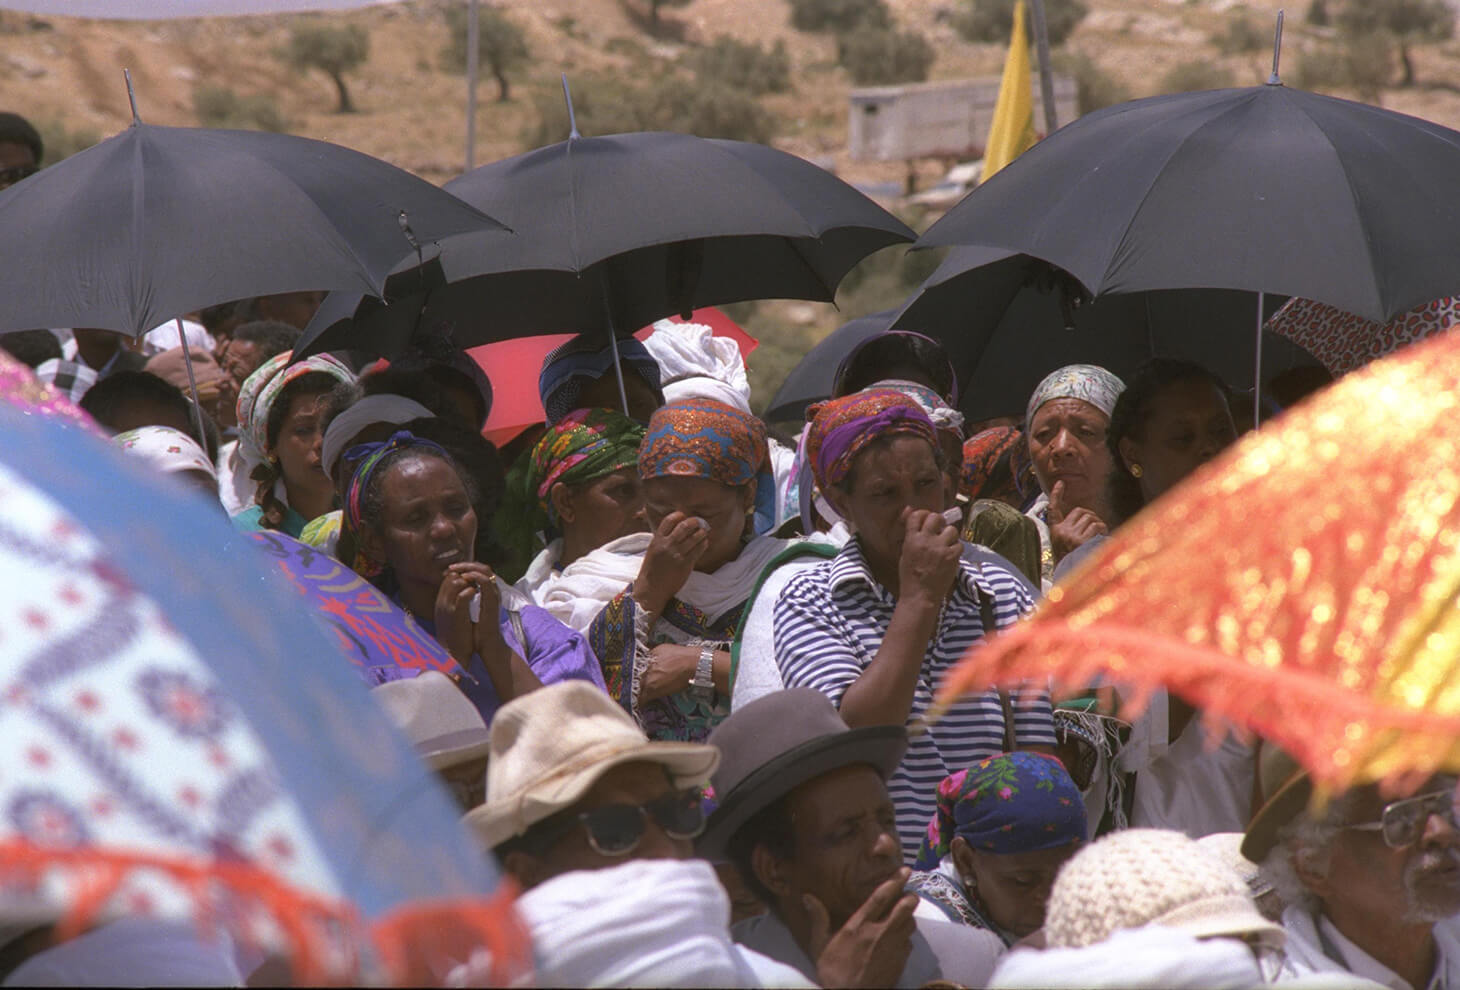 WOMEN CRYING AT A MEMORIAL CEREMONY FOR MARTYRS OF THE ETHIOPIAN COMMUNITY. Photo: Ziv Koren, GPO